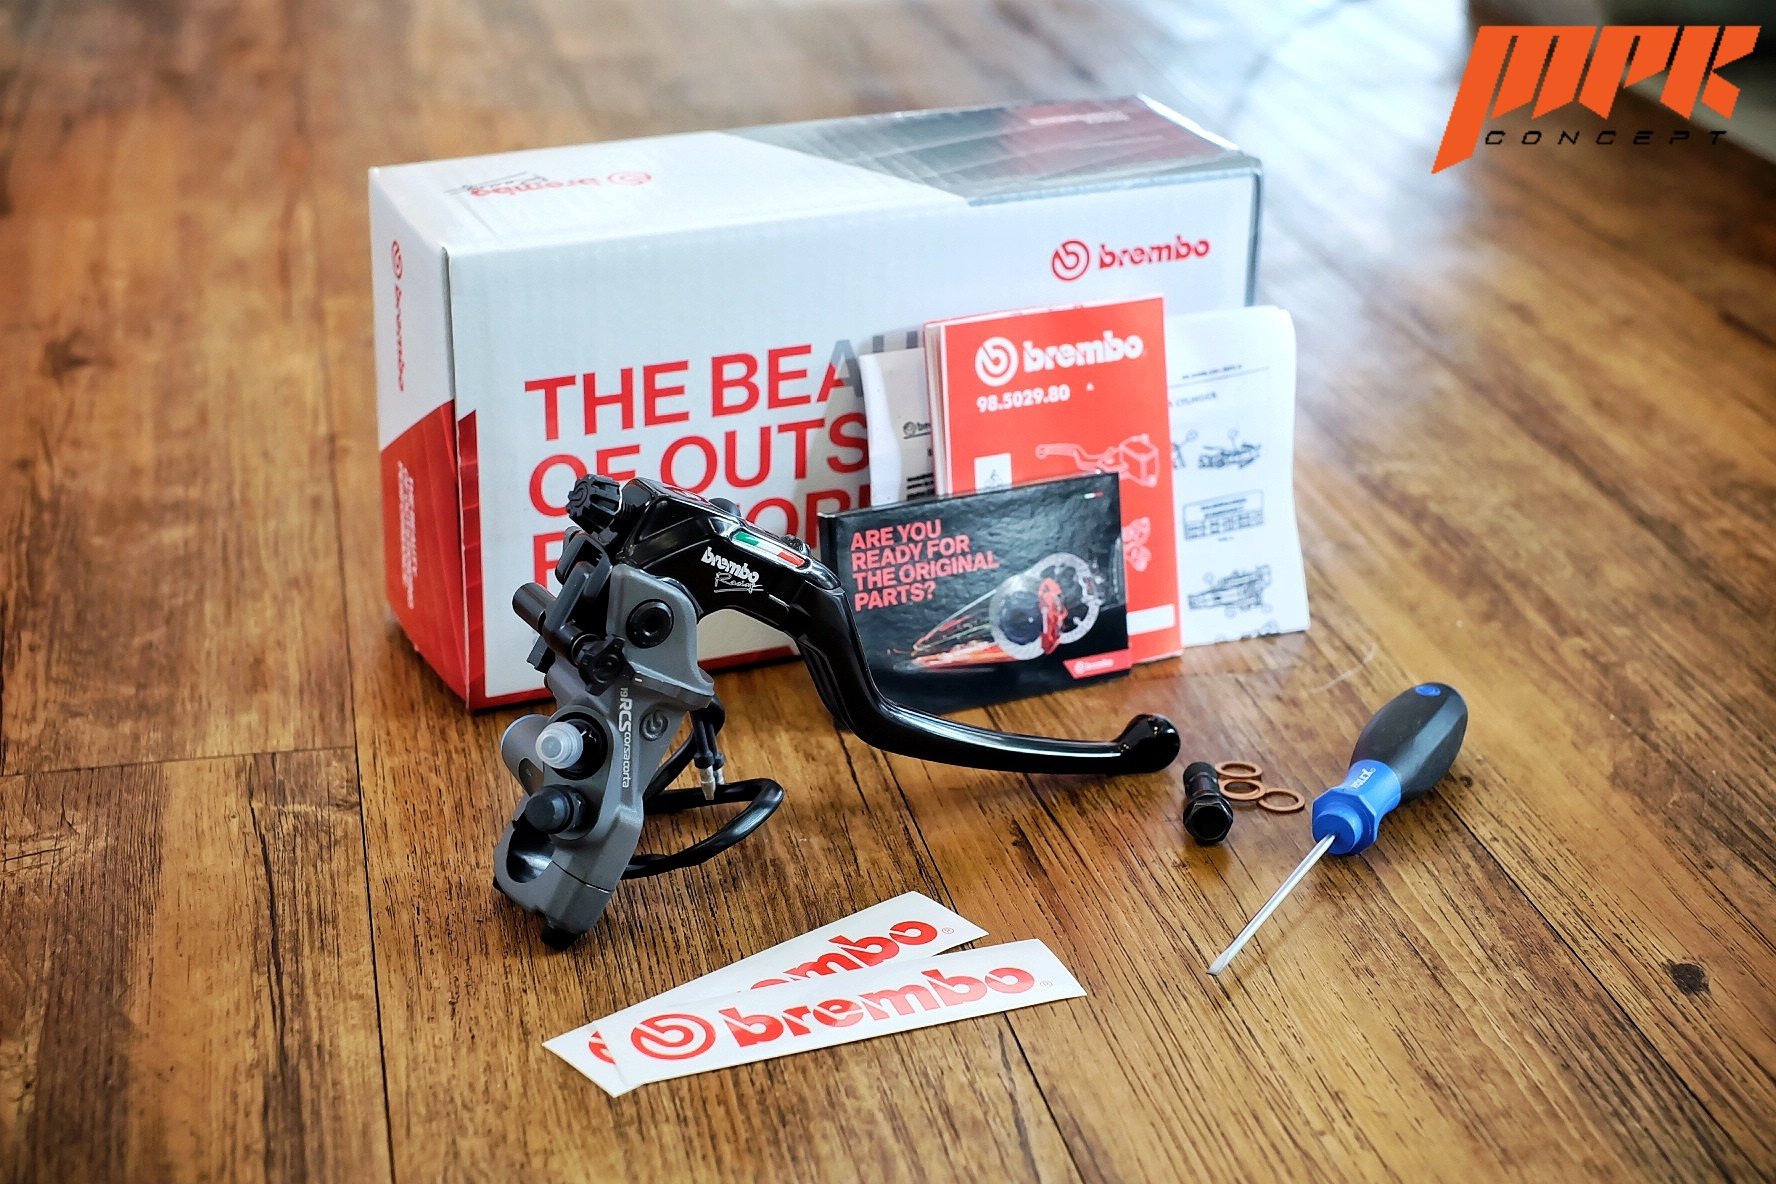 BREMBO MASTER CYLINDER 19RCS CORSACORTA FOR MOTORCYCLE